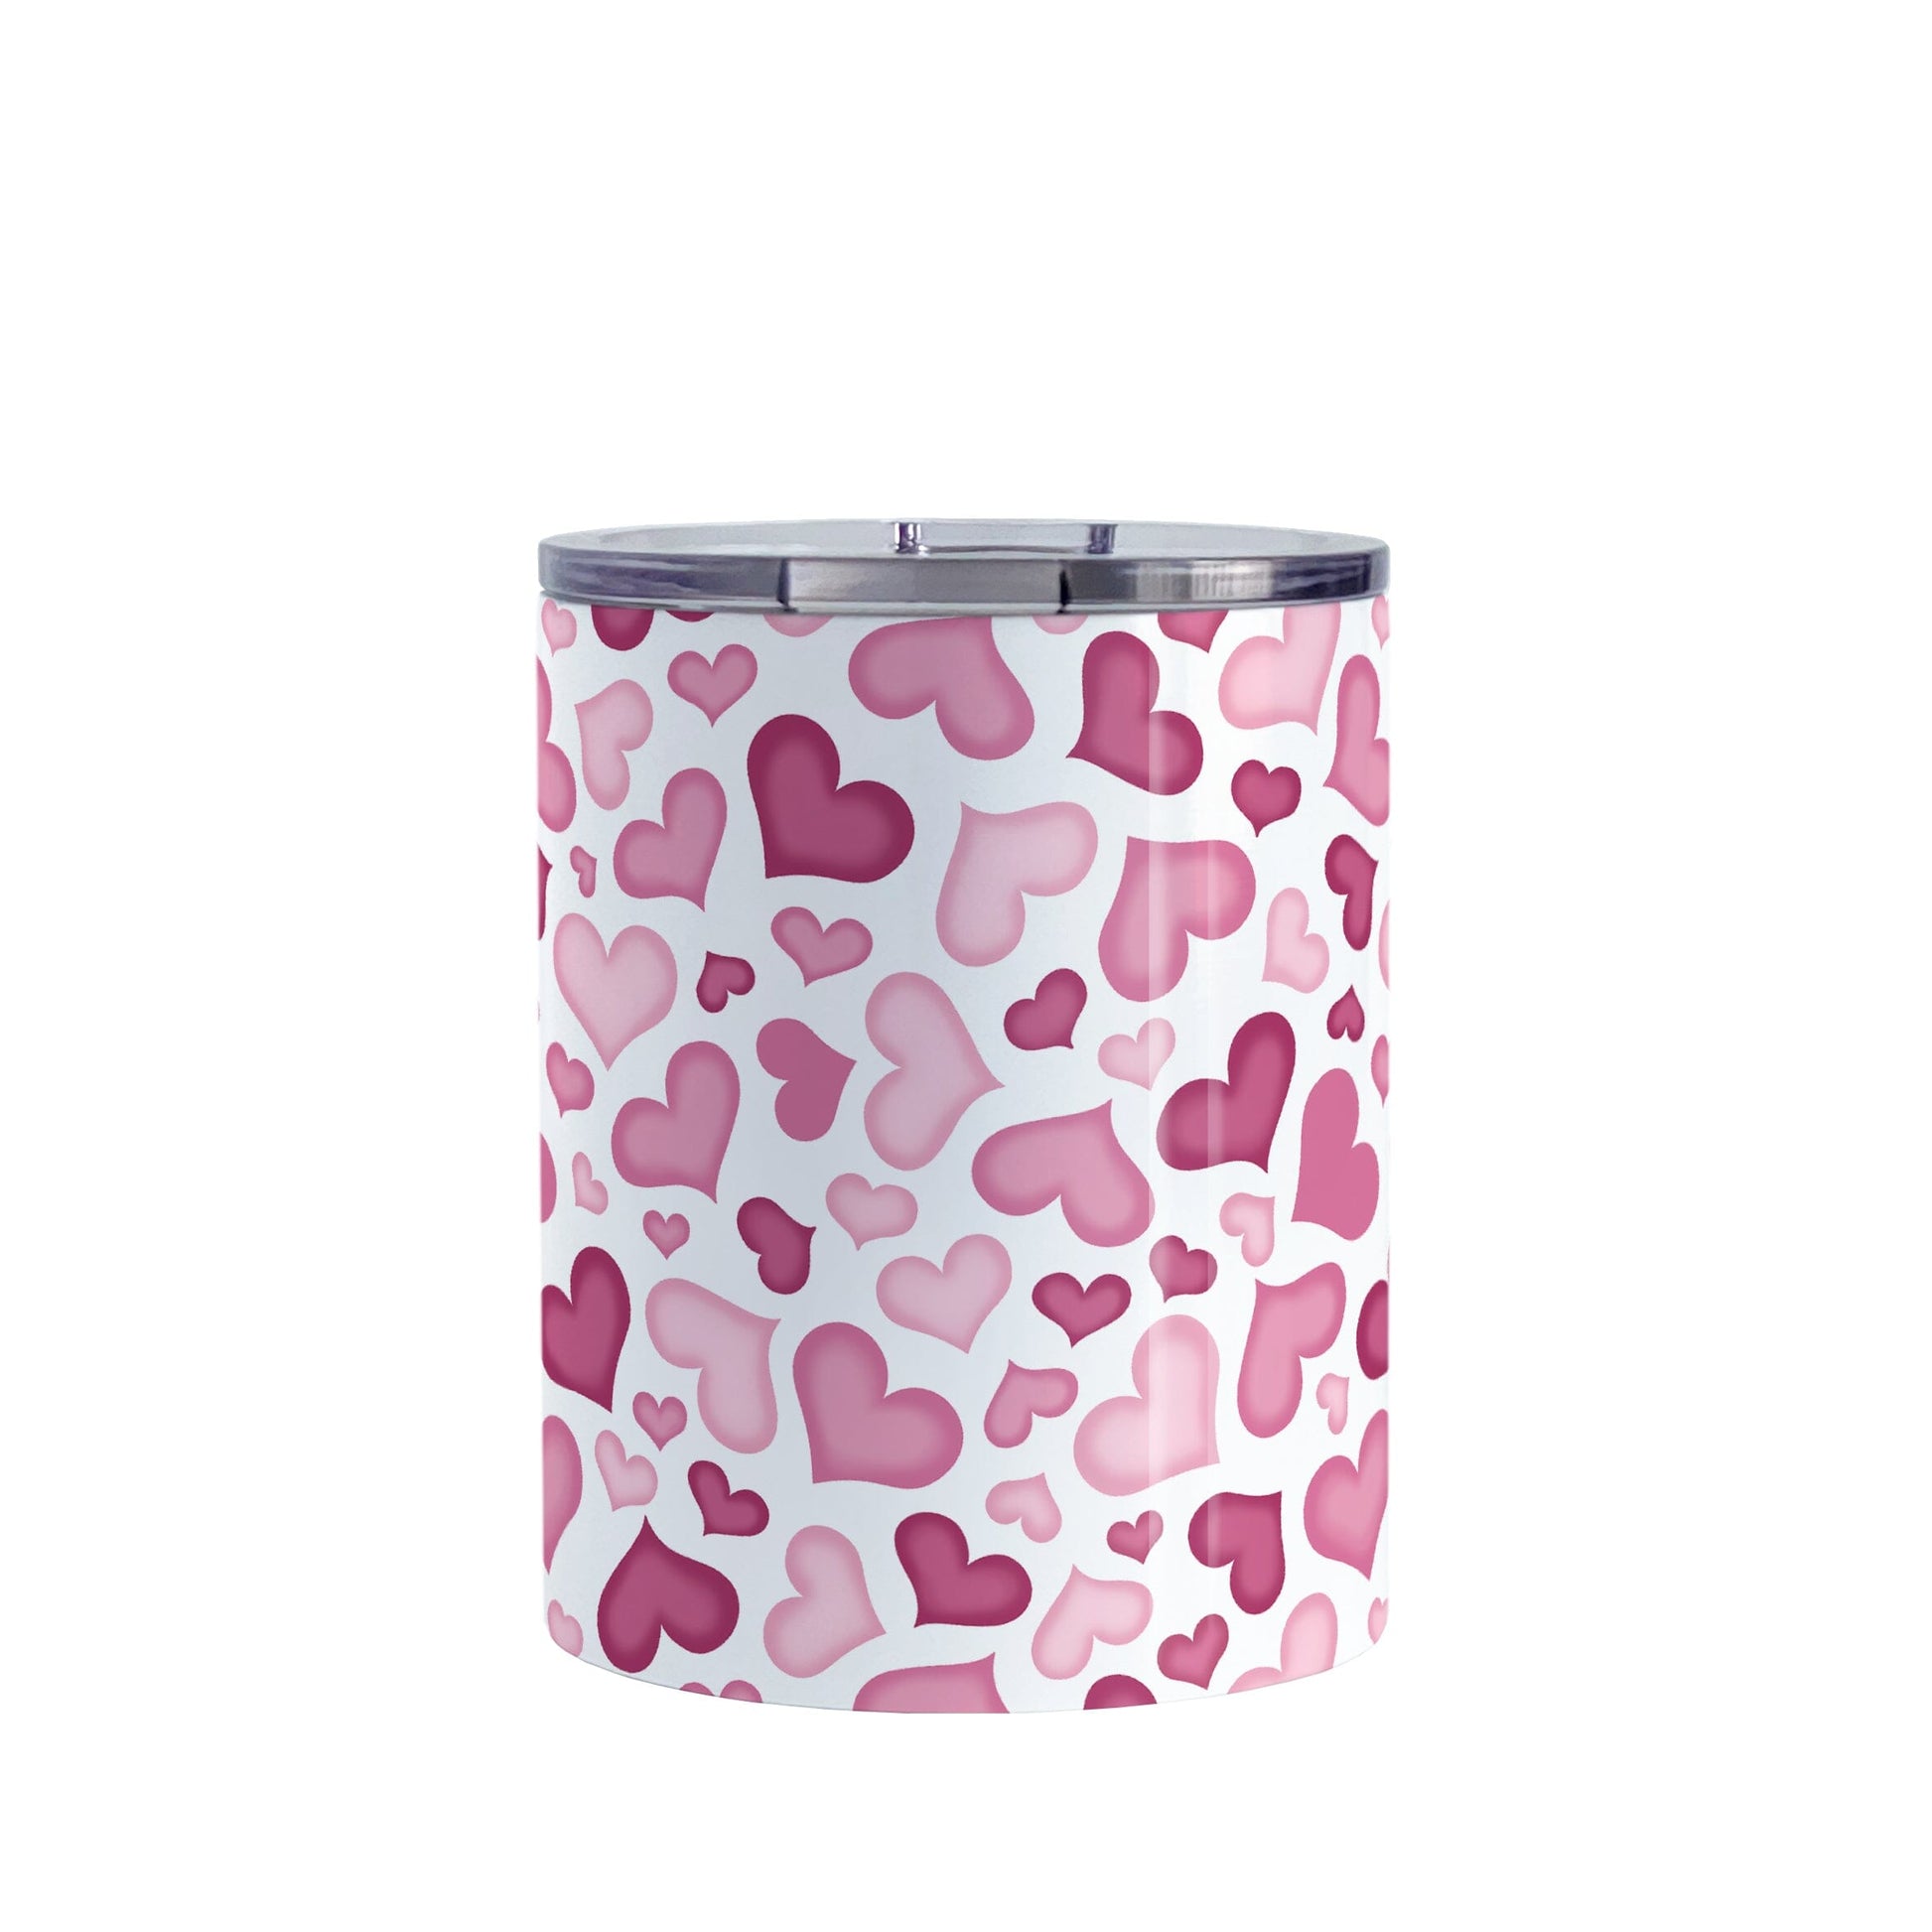 Cute Pink Hearts Pattern Tumbler Cup (10oz) at Amy's Coffee Mugs. A stainless steel tumbler cup designed with a pattern of cute hearts in different shades of pink that wrap around the cup. 